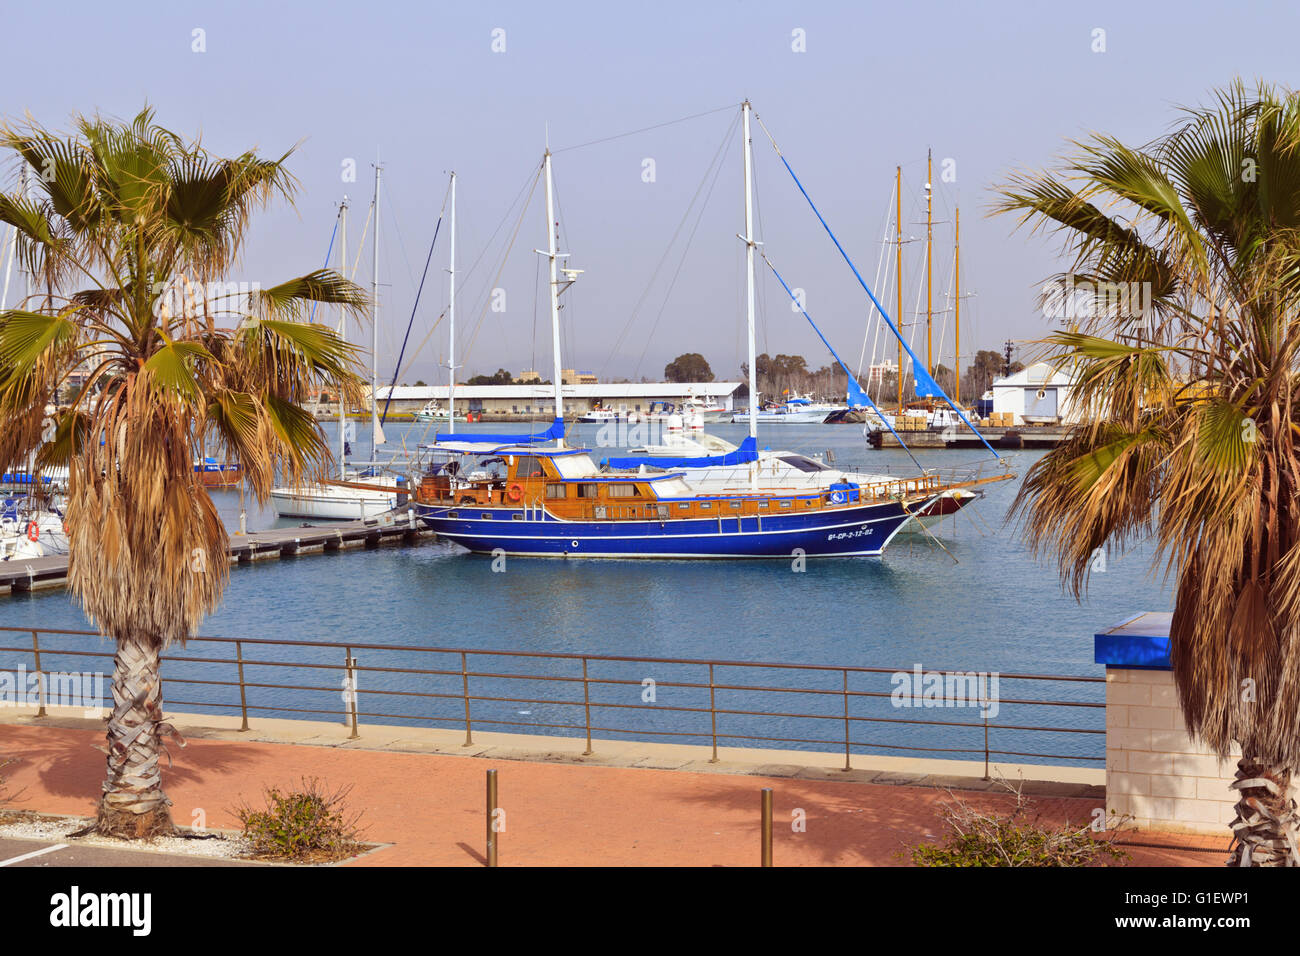 Wooden hull yacht moored in Burriana Harbour, Spain Stock Photo